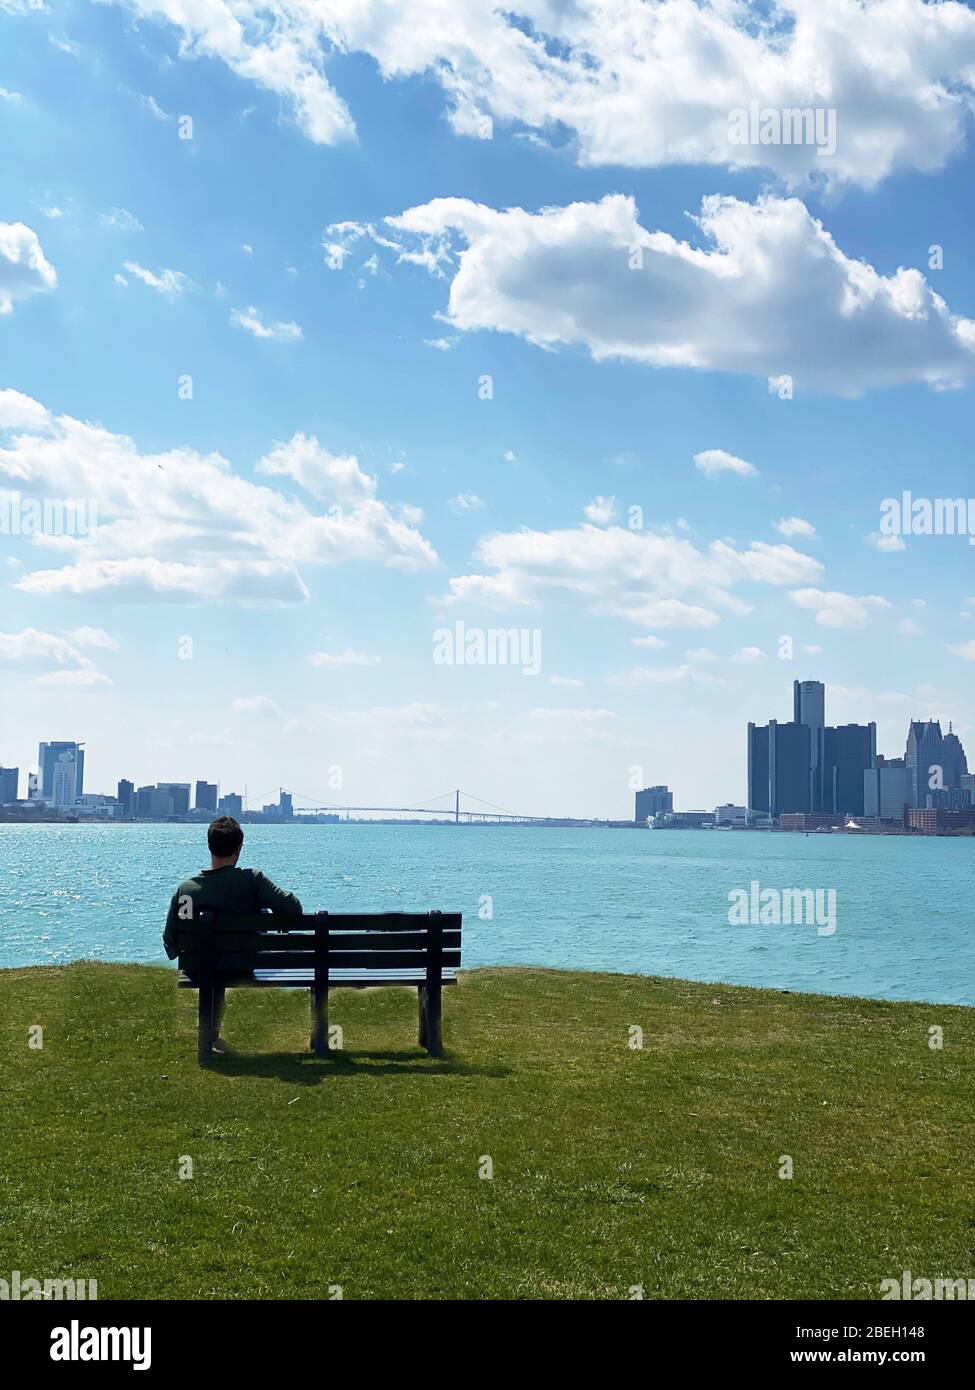 Lone person on bench overlooking Windsor,Canada & Detroit's international border as Social distancing and stay at home order because of Coronavirus Stock Photo